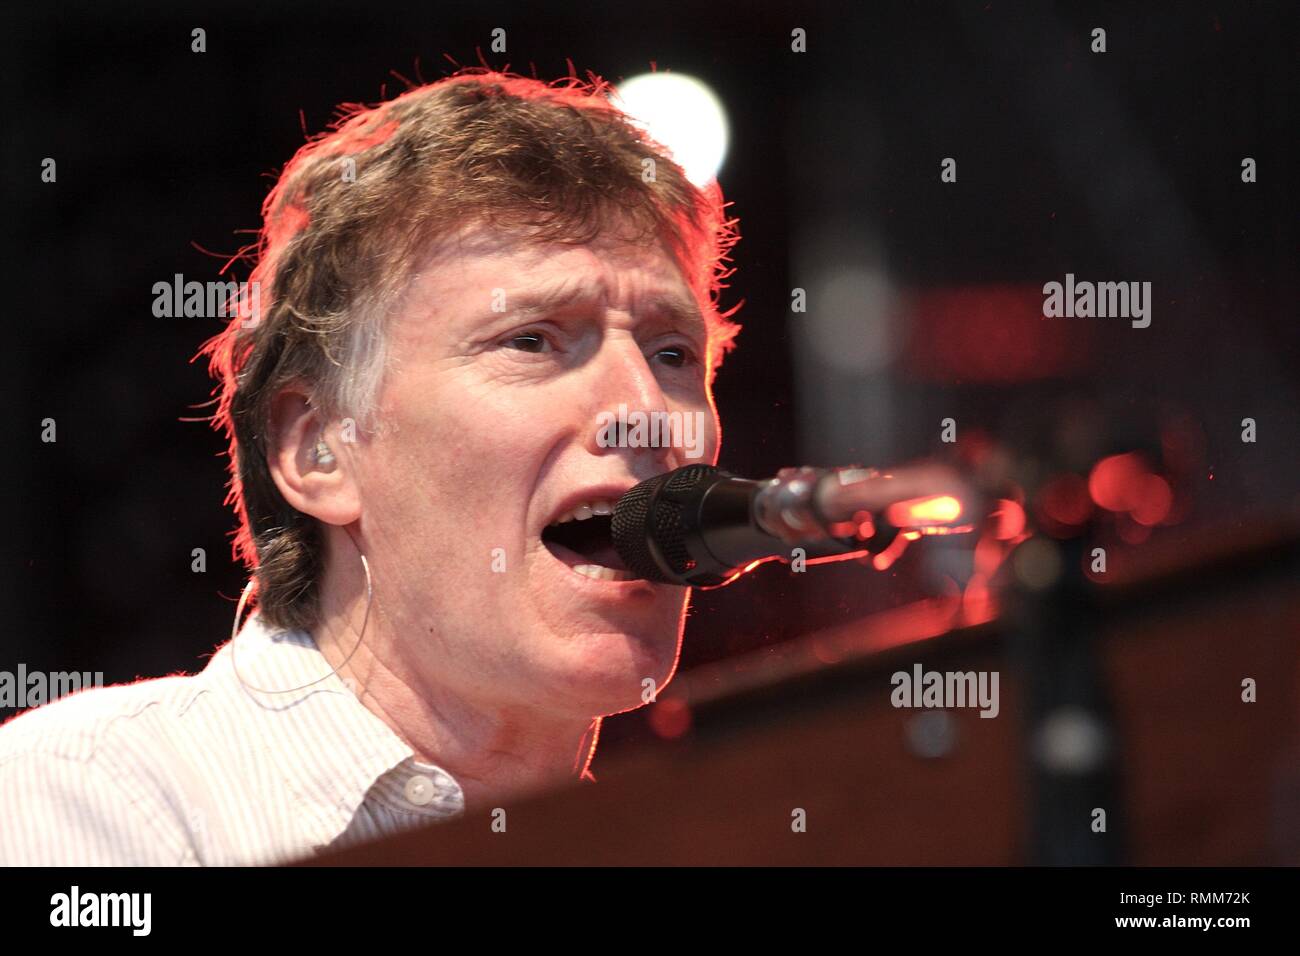 Singer, songwriter and multi-instrumentalist Steve Winwood, formerly of the the Spencer Davis Group, Traffic and Blind Faith, is shown performing on stage during 'live' concert appearance. Stock Photo